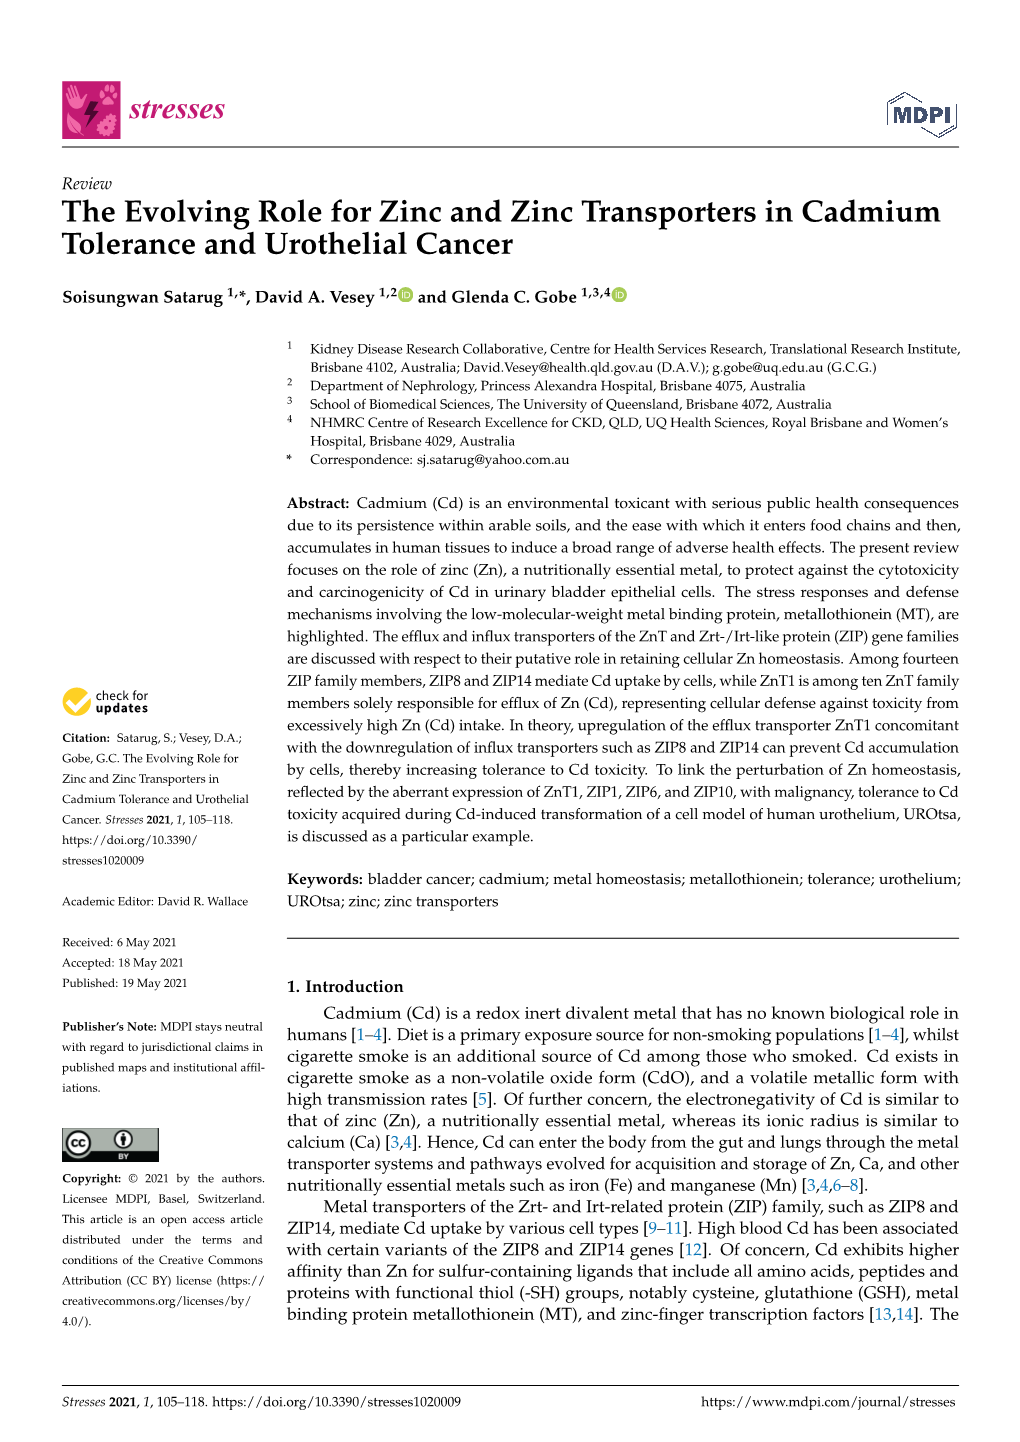 The Evolving Role for Zinc and Zinc Transporters in Cadmium Tolerance and Urothelial Cancer